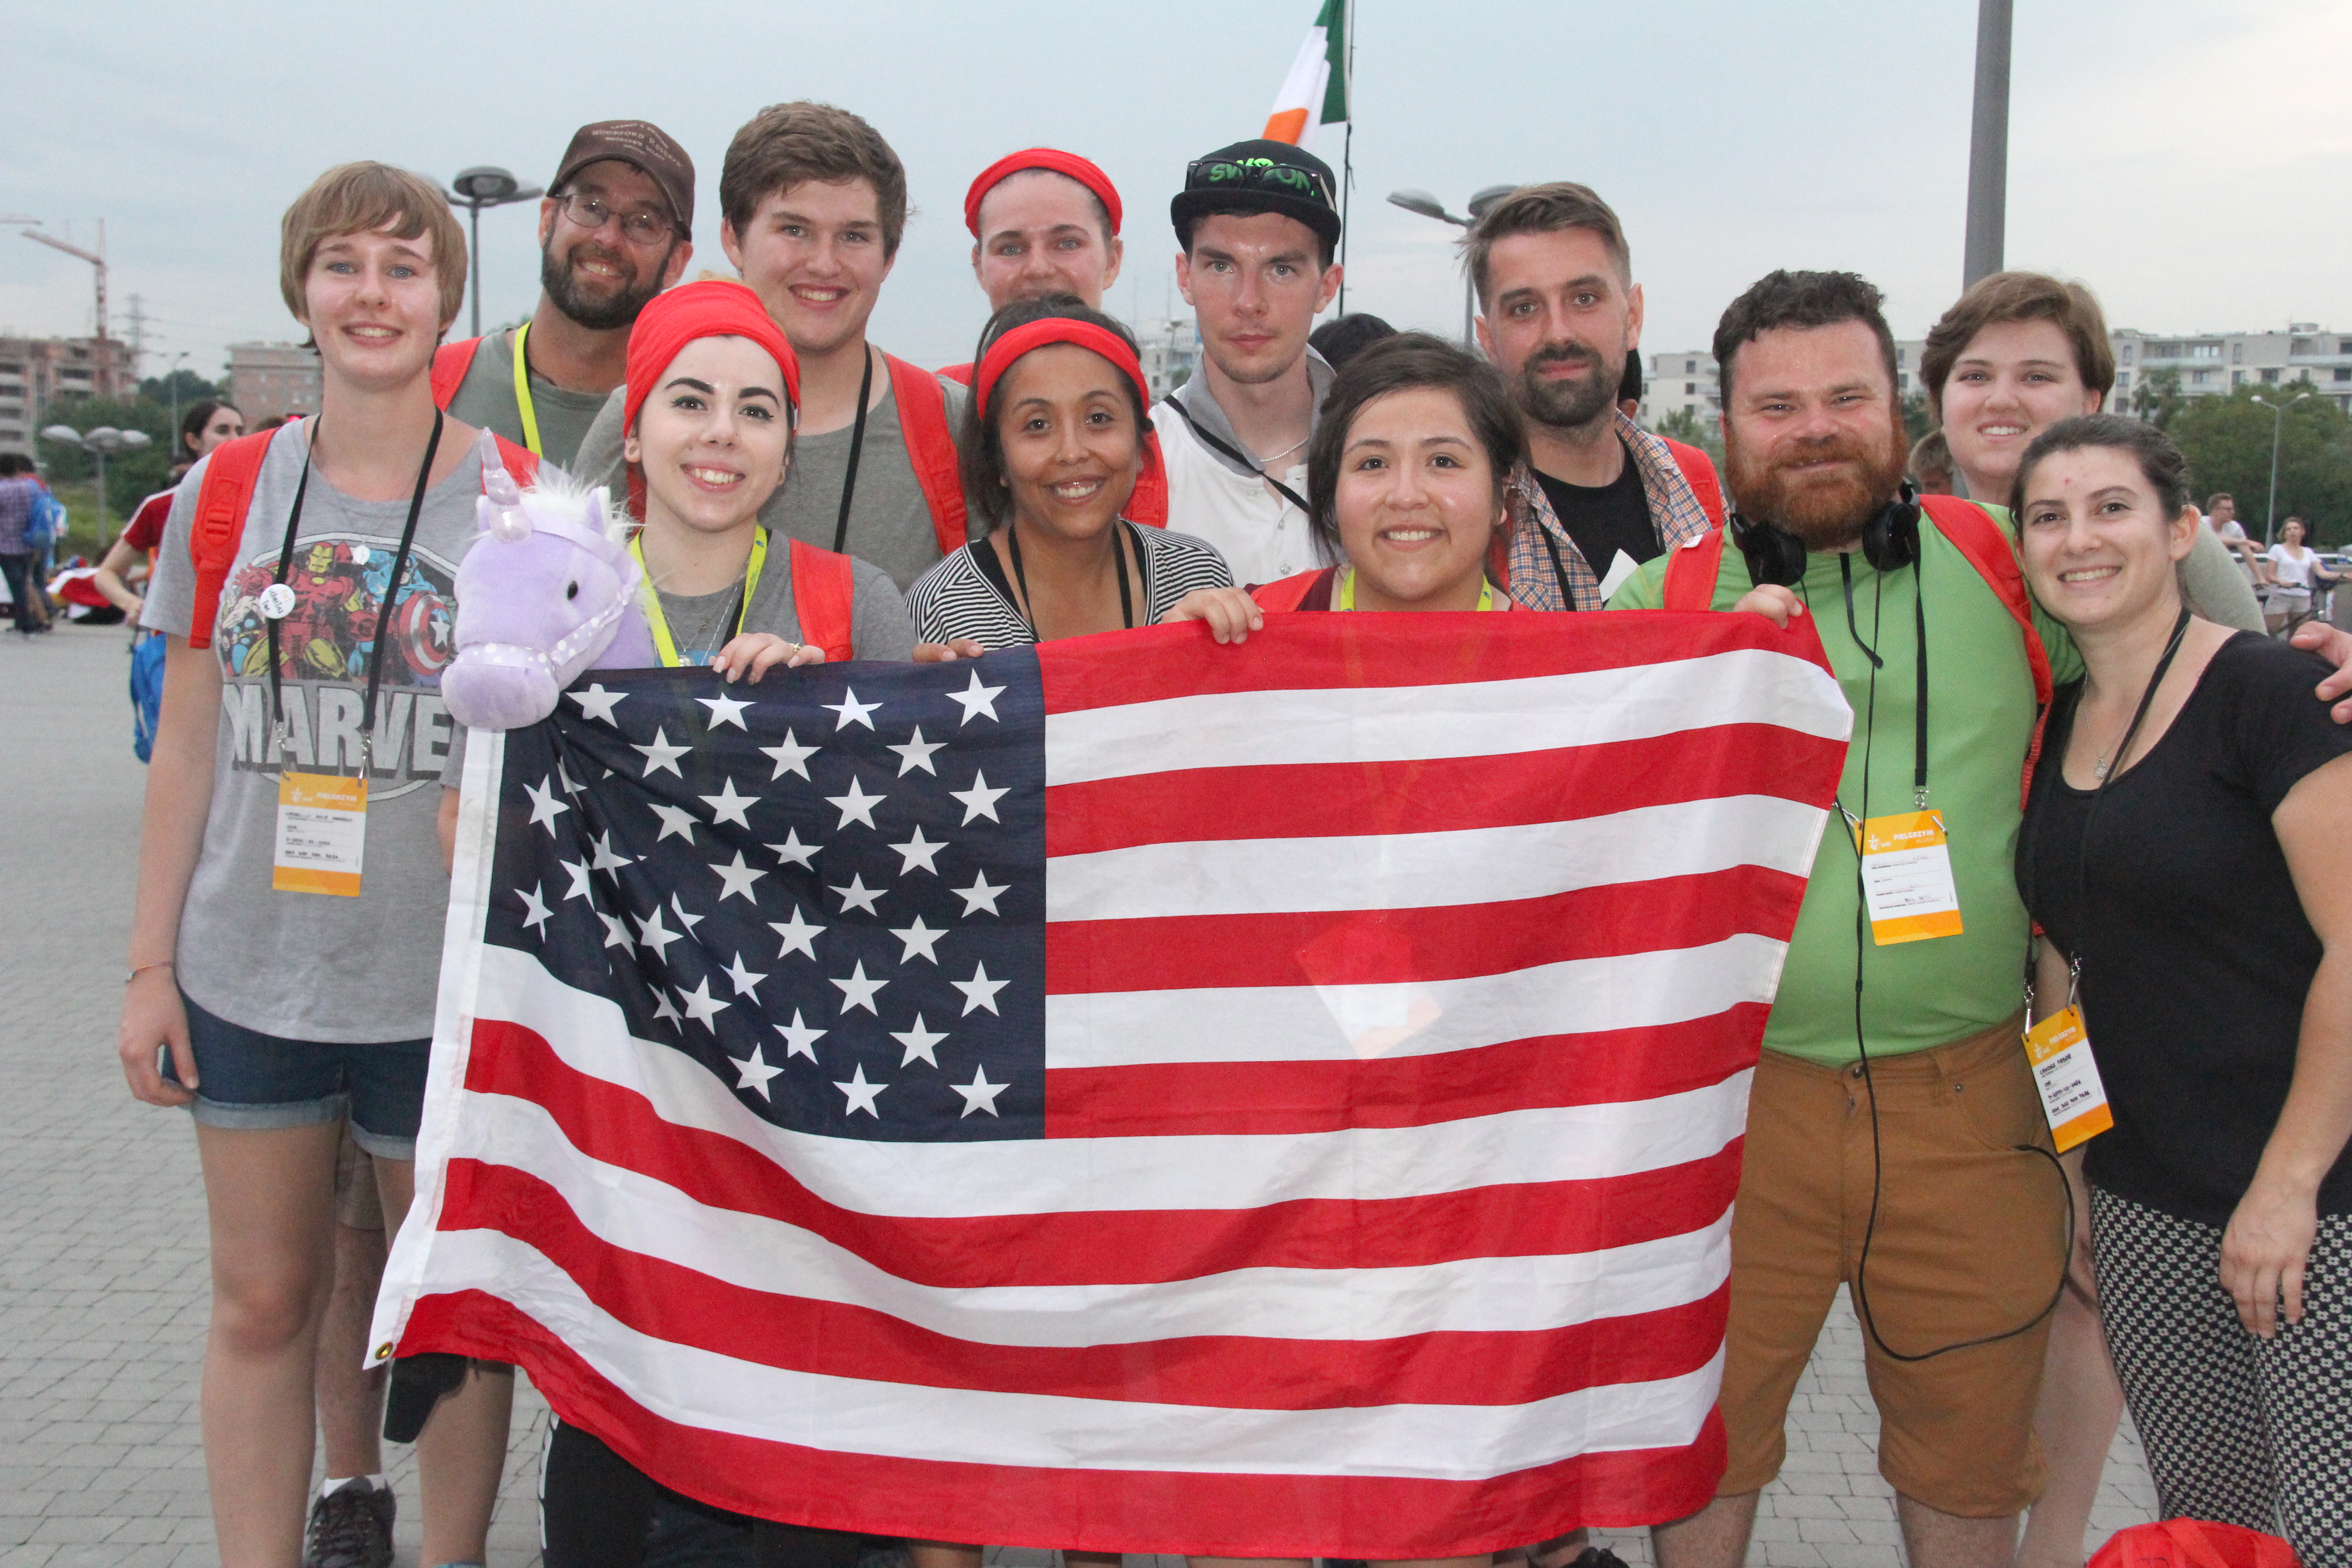 A group of pilgrims from Sacred Heart Parish in Prescott hold an American flag as they arrive in Krakow for World Youth Day. (Justin Bell/CATHOLIC SUN)